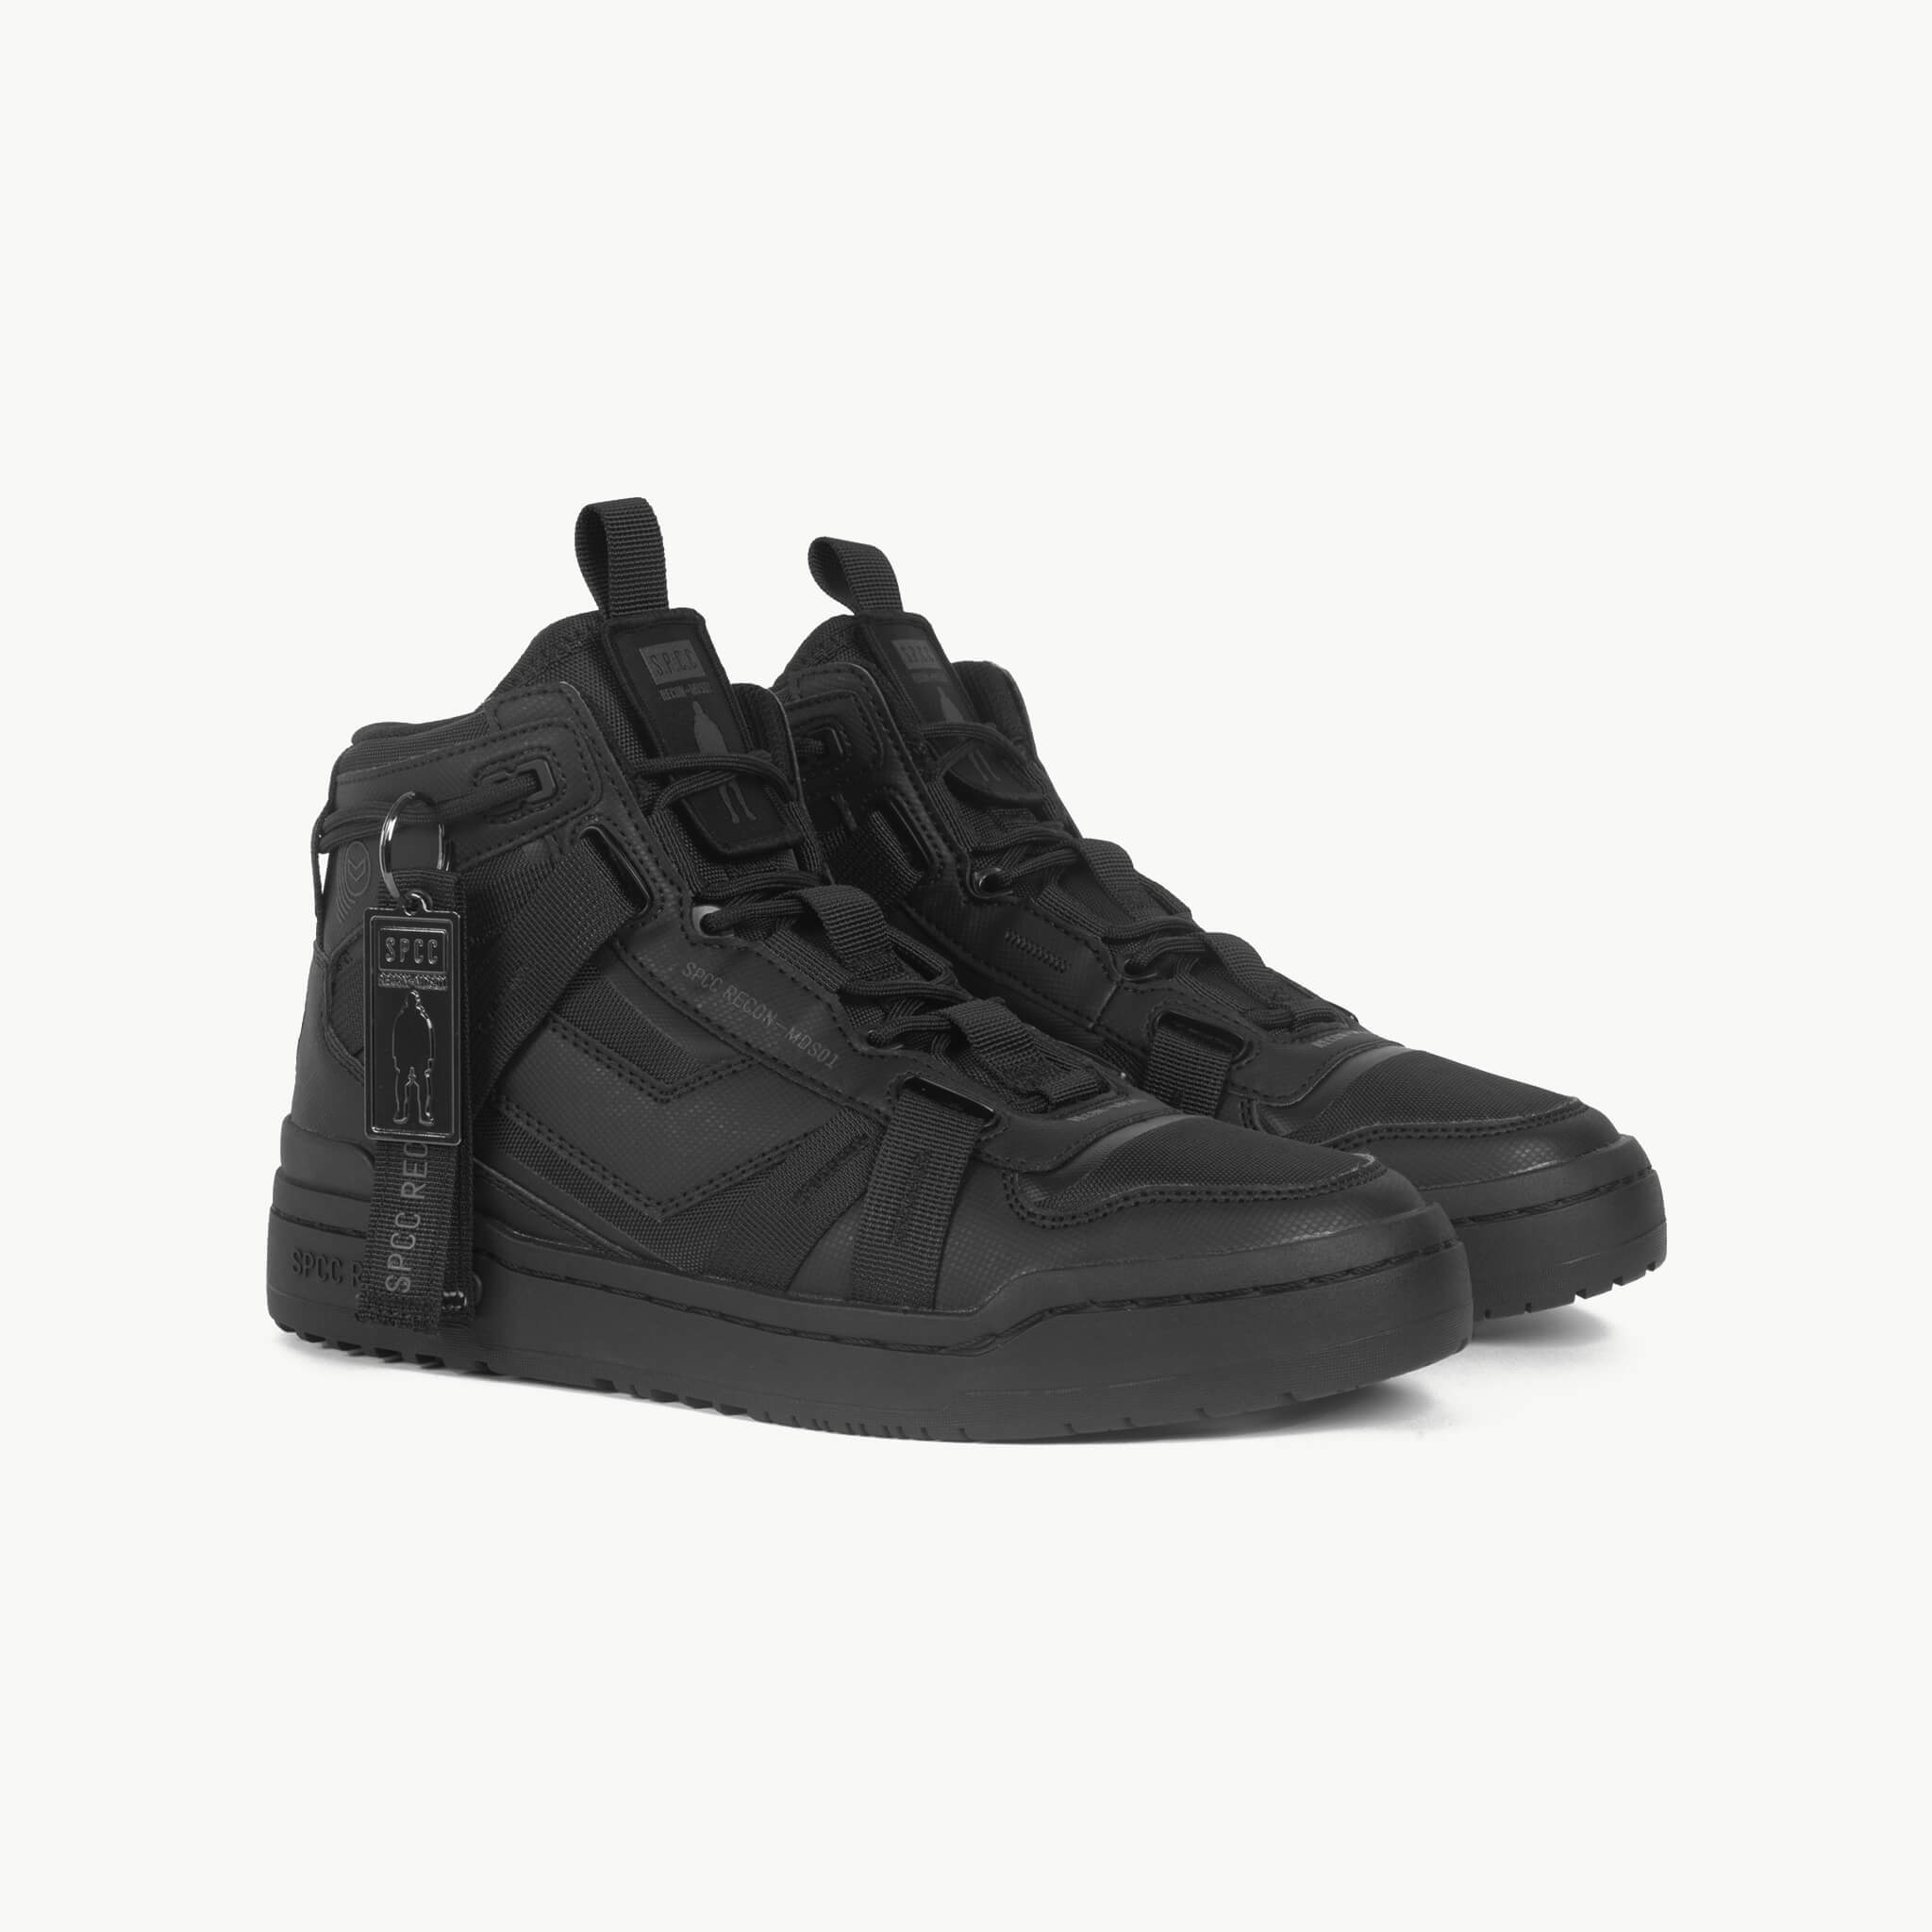 Recon MDS01 Hi Sneakers - Black – S.P.C.C Official Store